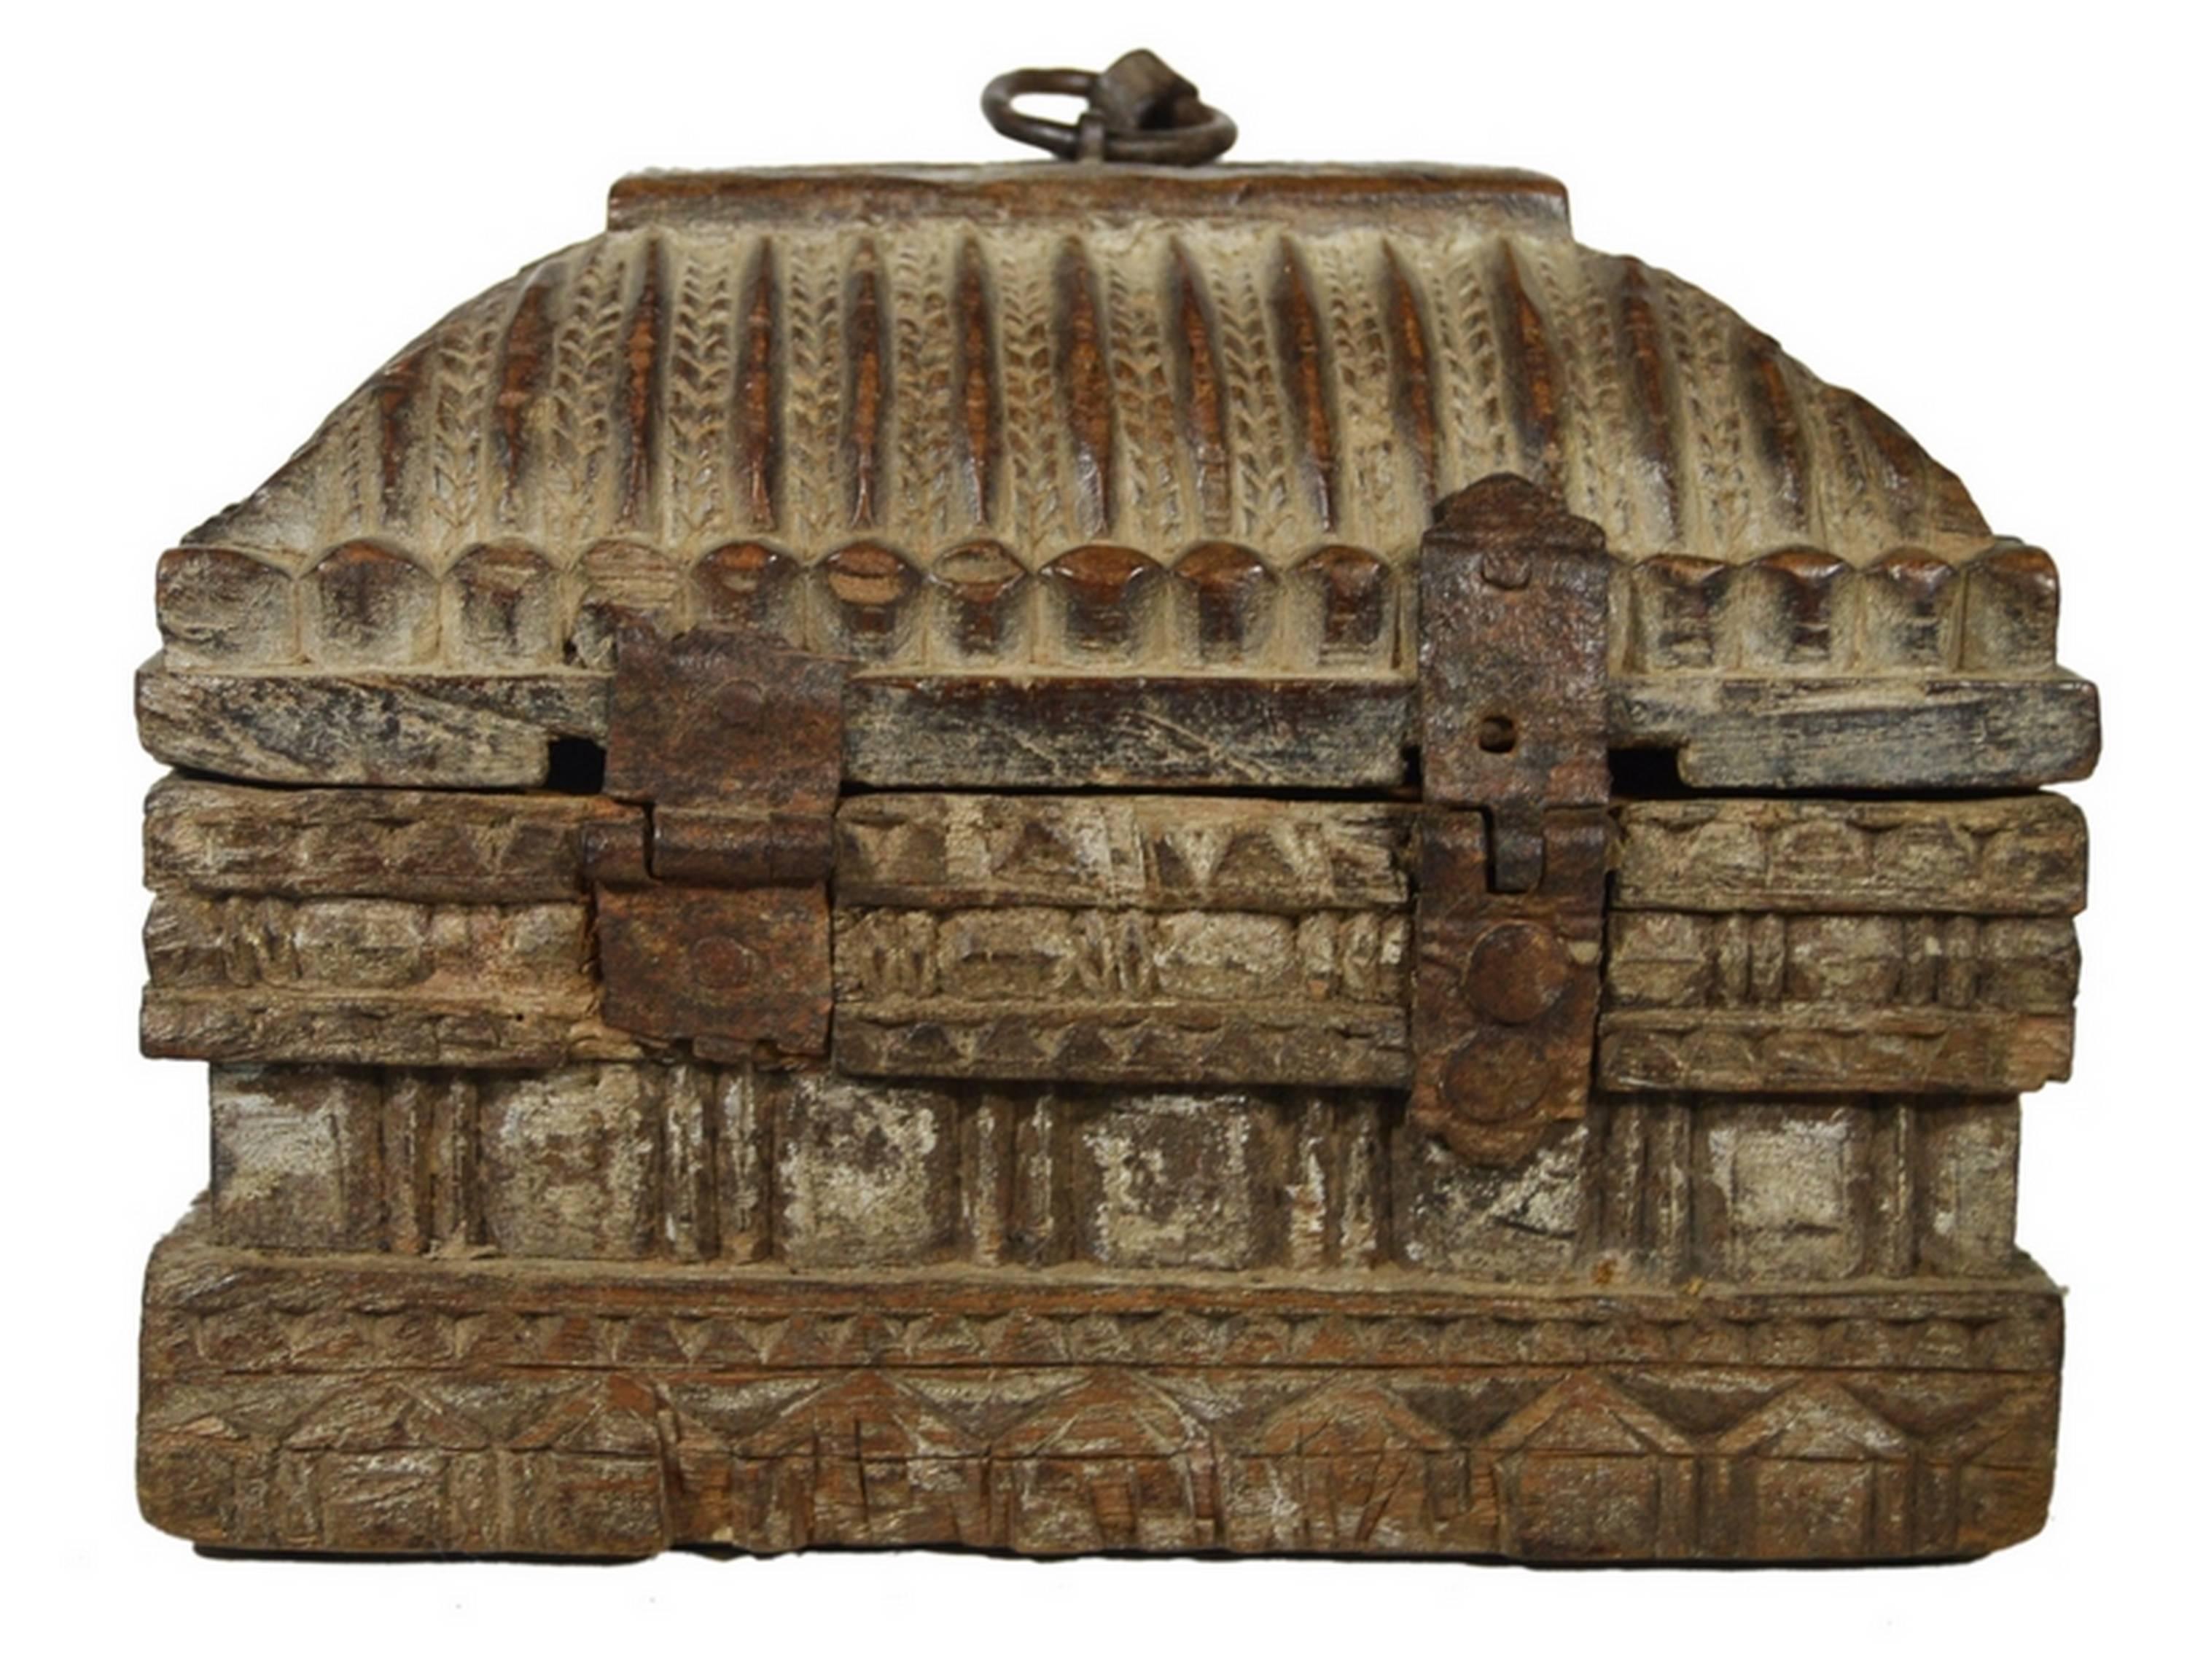 Hand-Carved Antique Indian Handmade Carved and Detailed Wooden Money Box, 19th Century